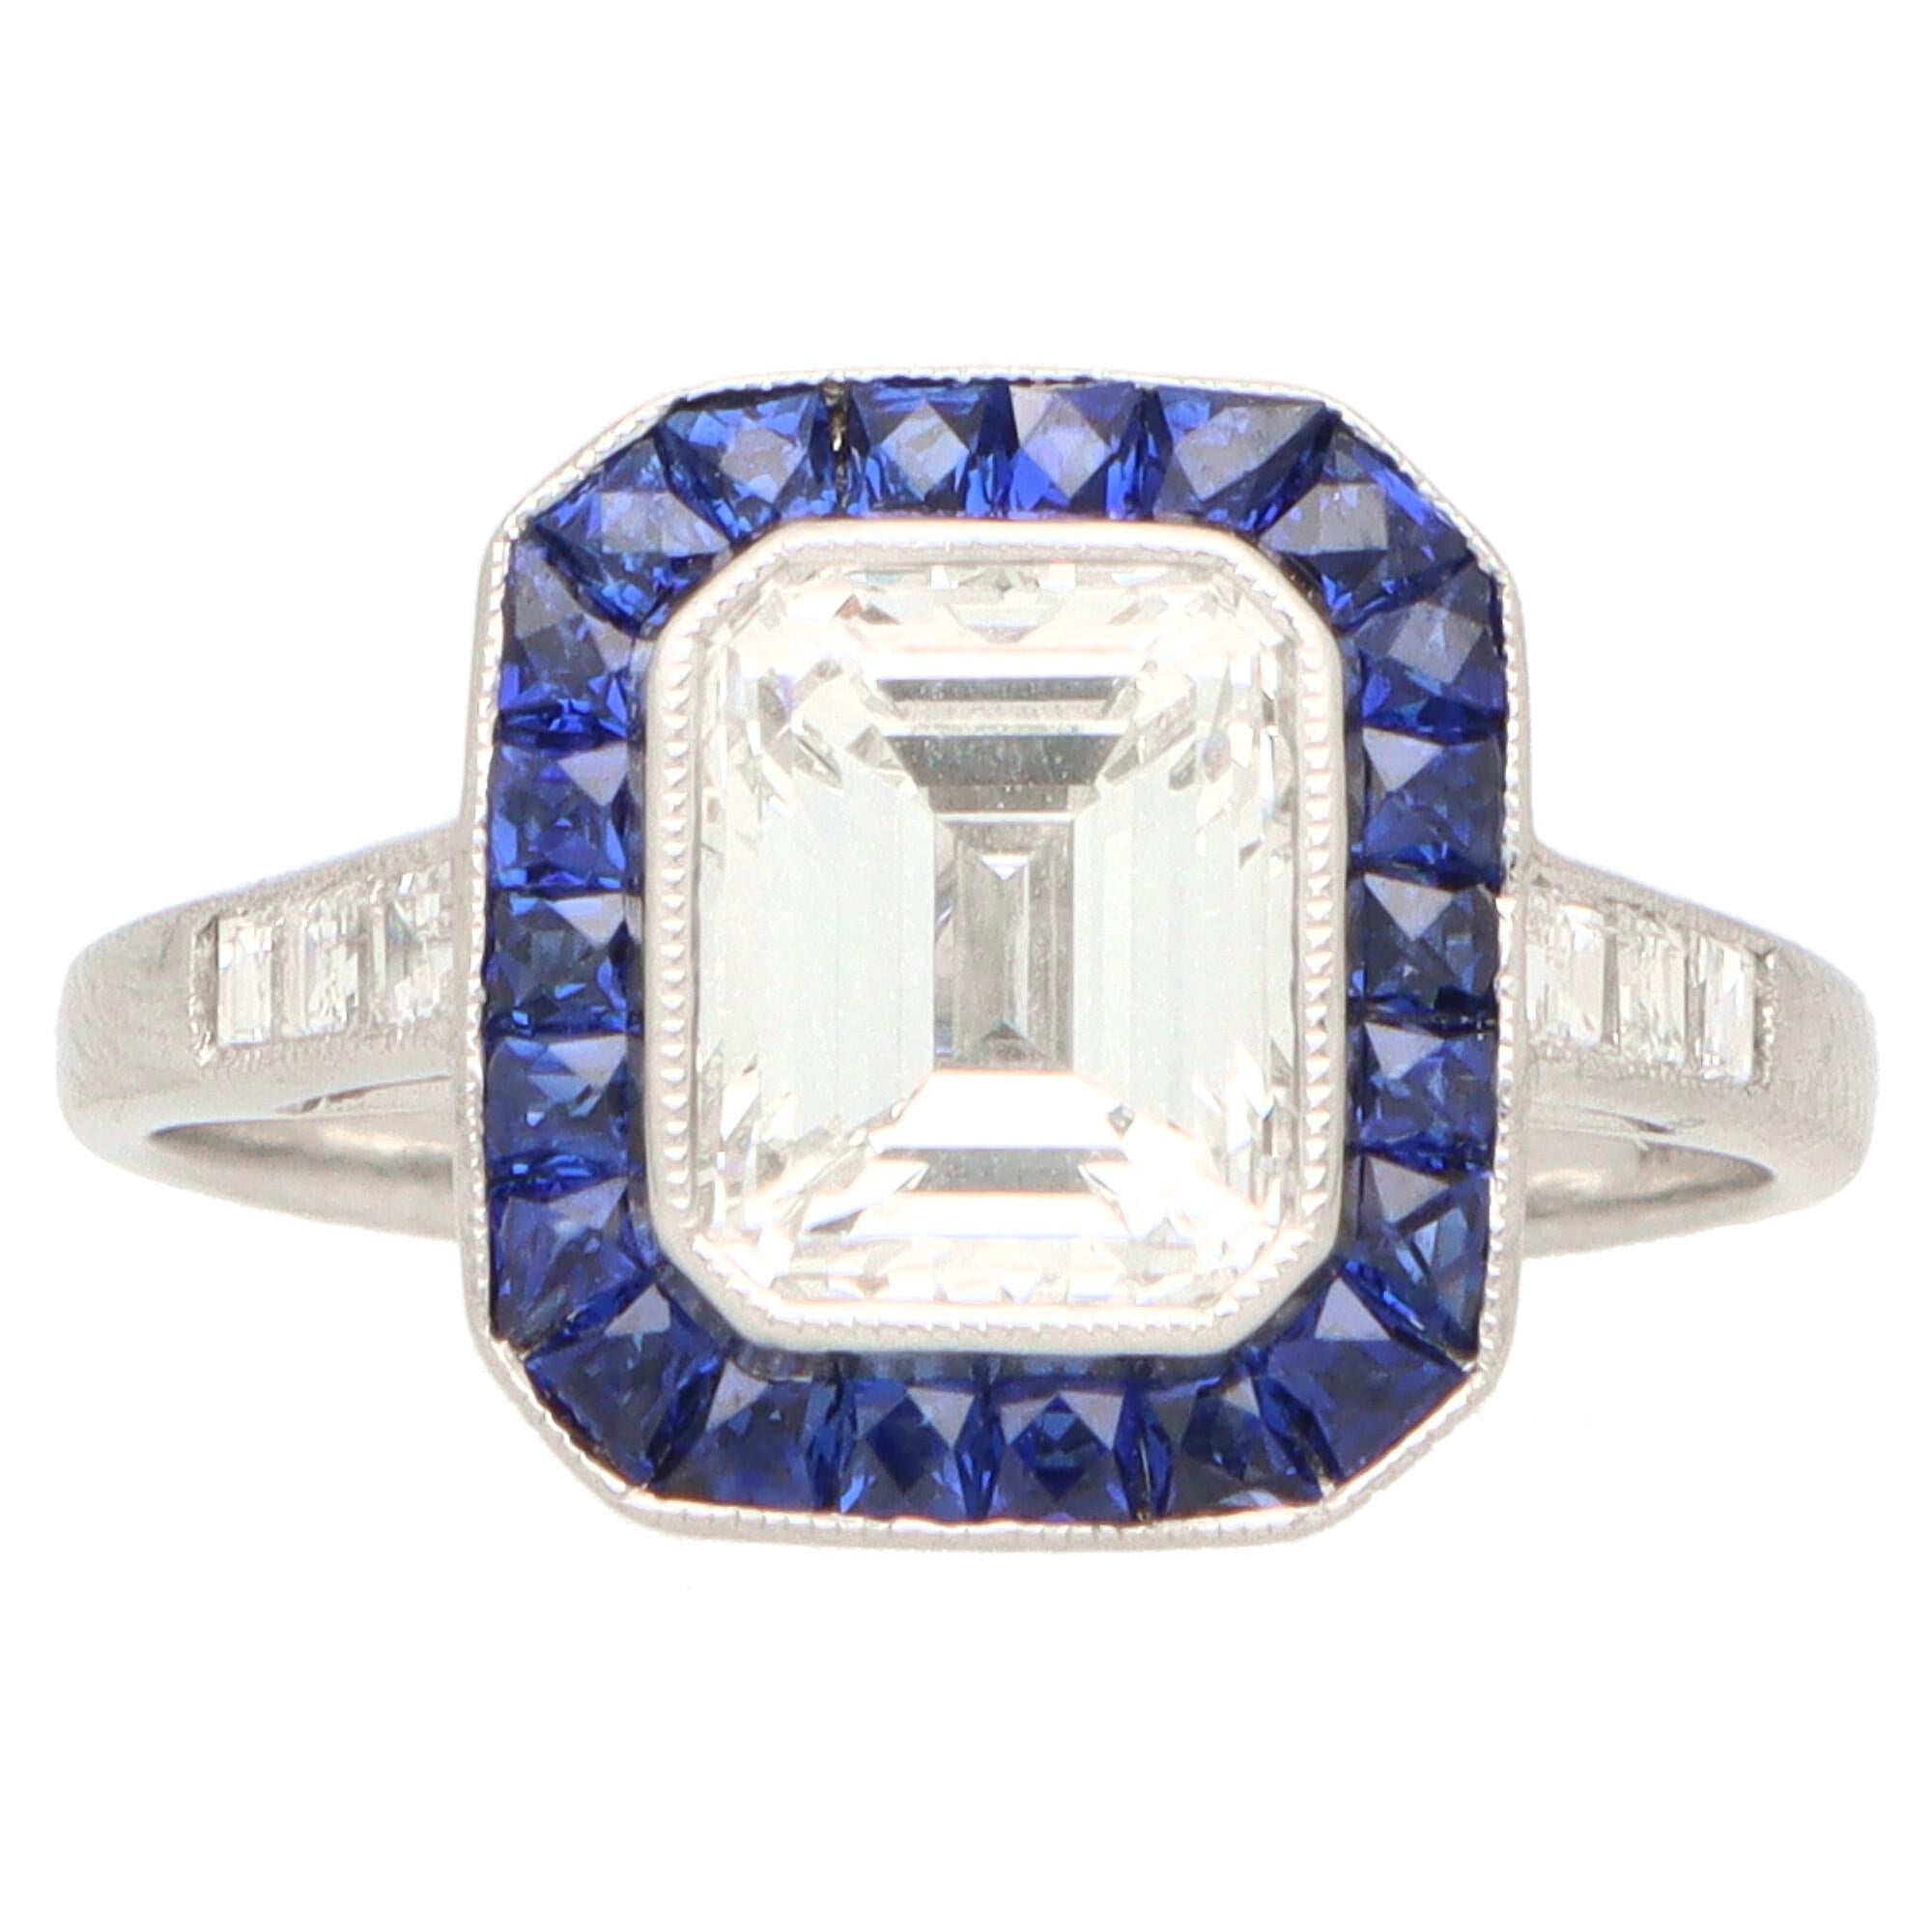 Art Deco Style 2.03ct Emerald Cut Diamond and Sapphire Target Ring in Platinum